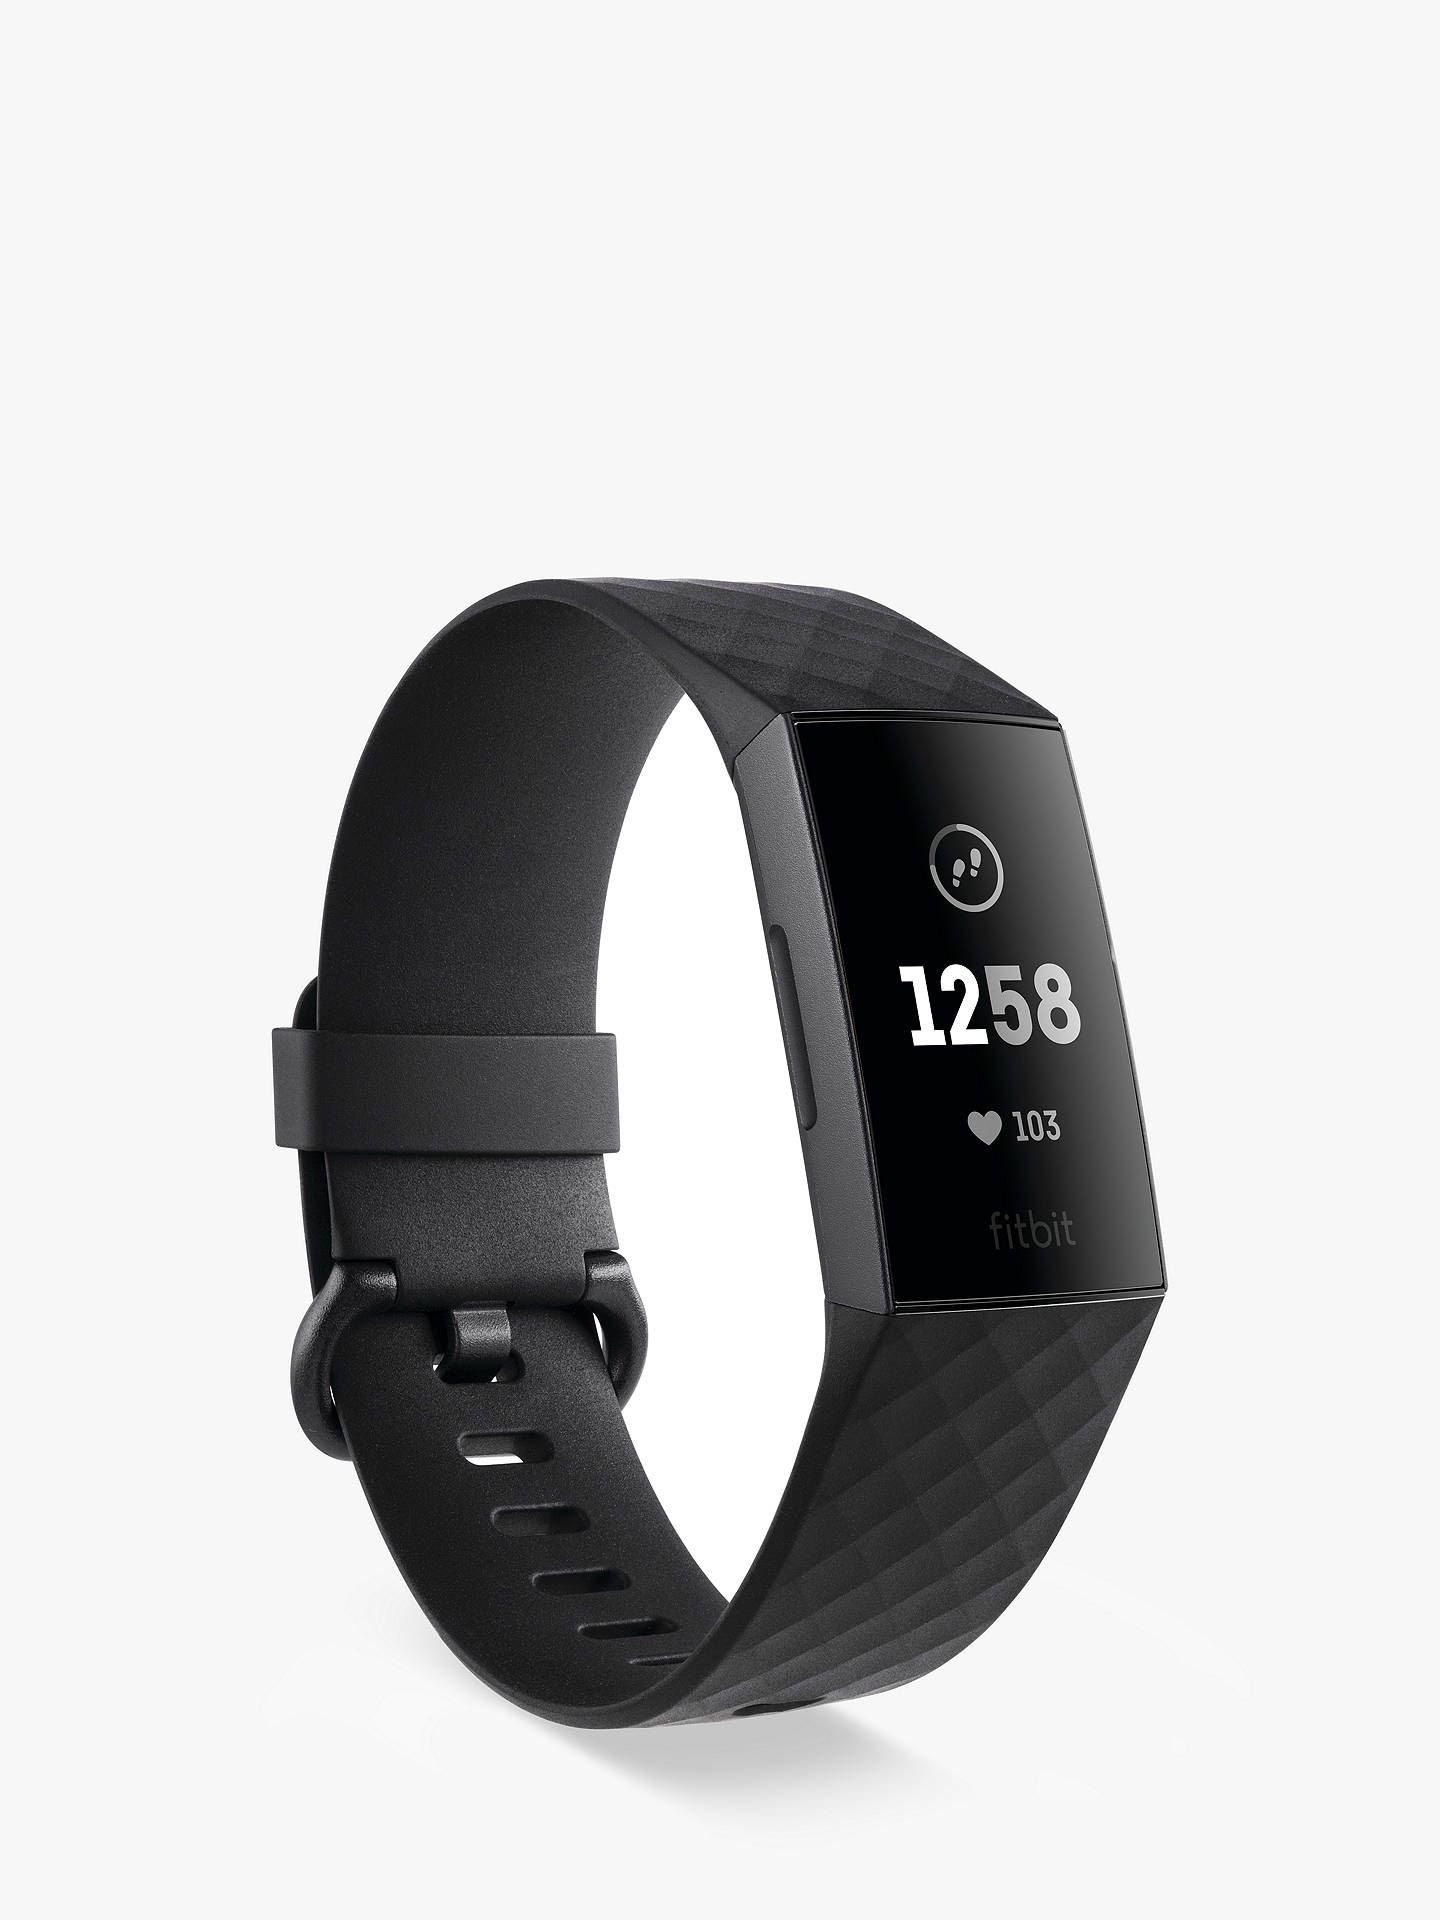 cheapest fitbit with gps